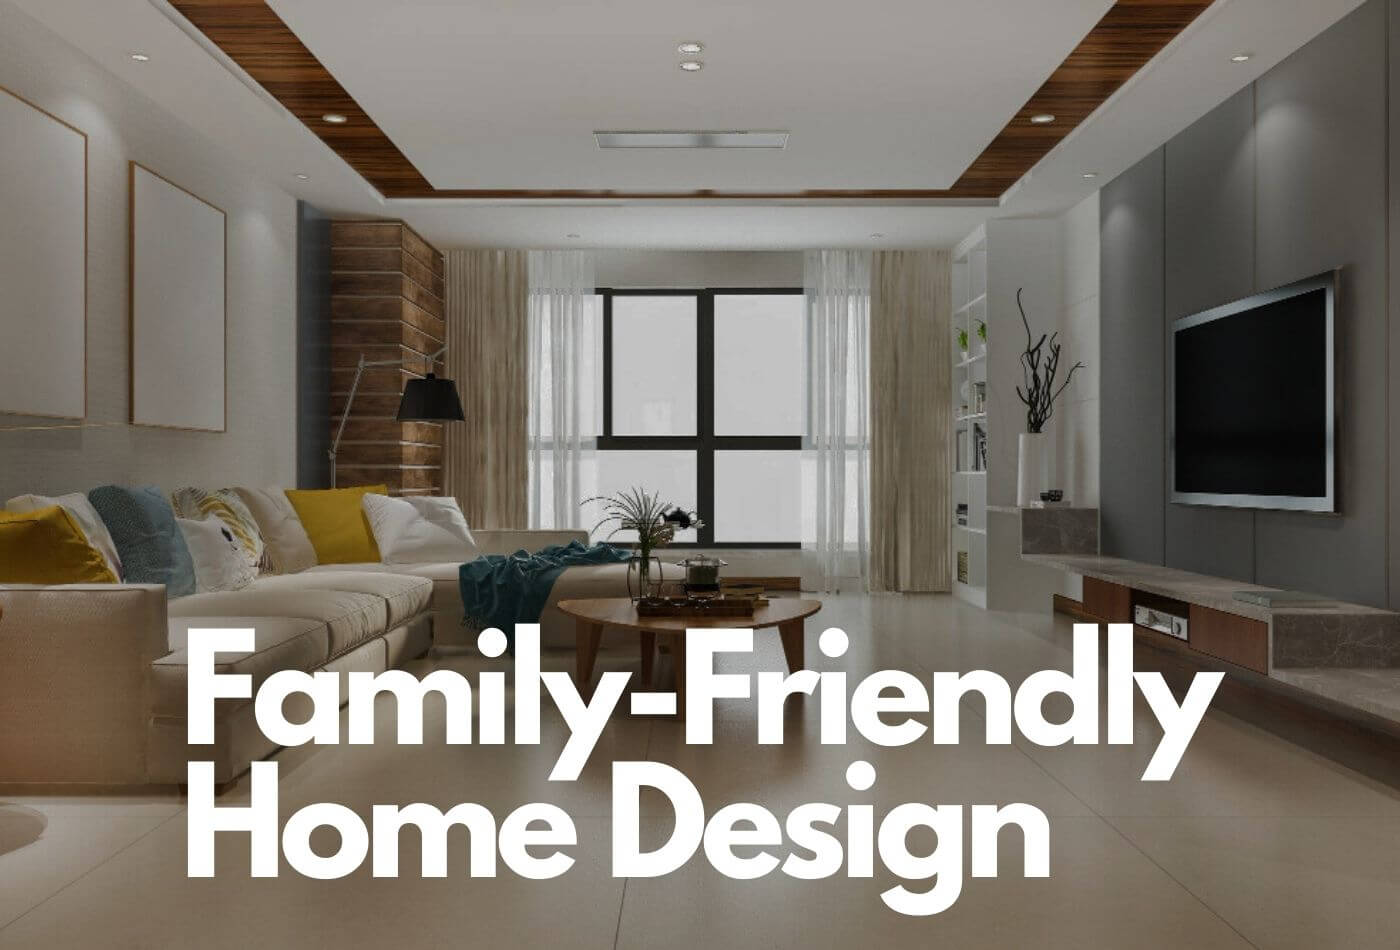 Plan a Family-friendly Home Design With Work-tops?